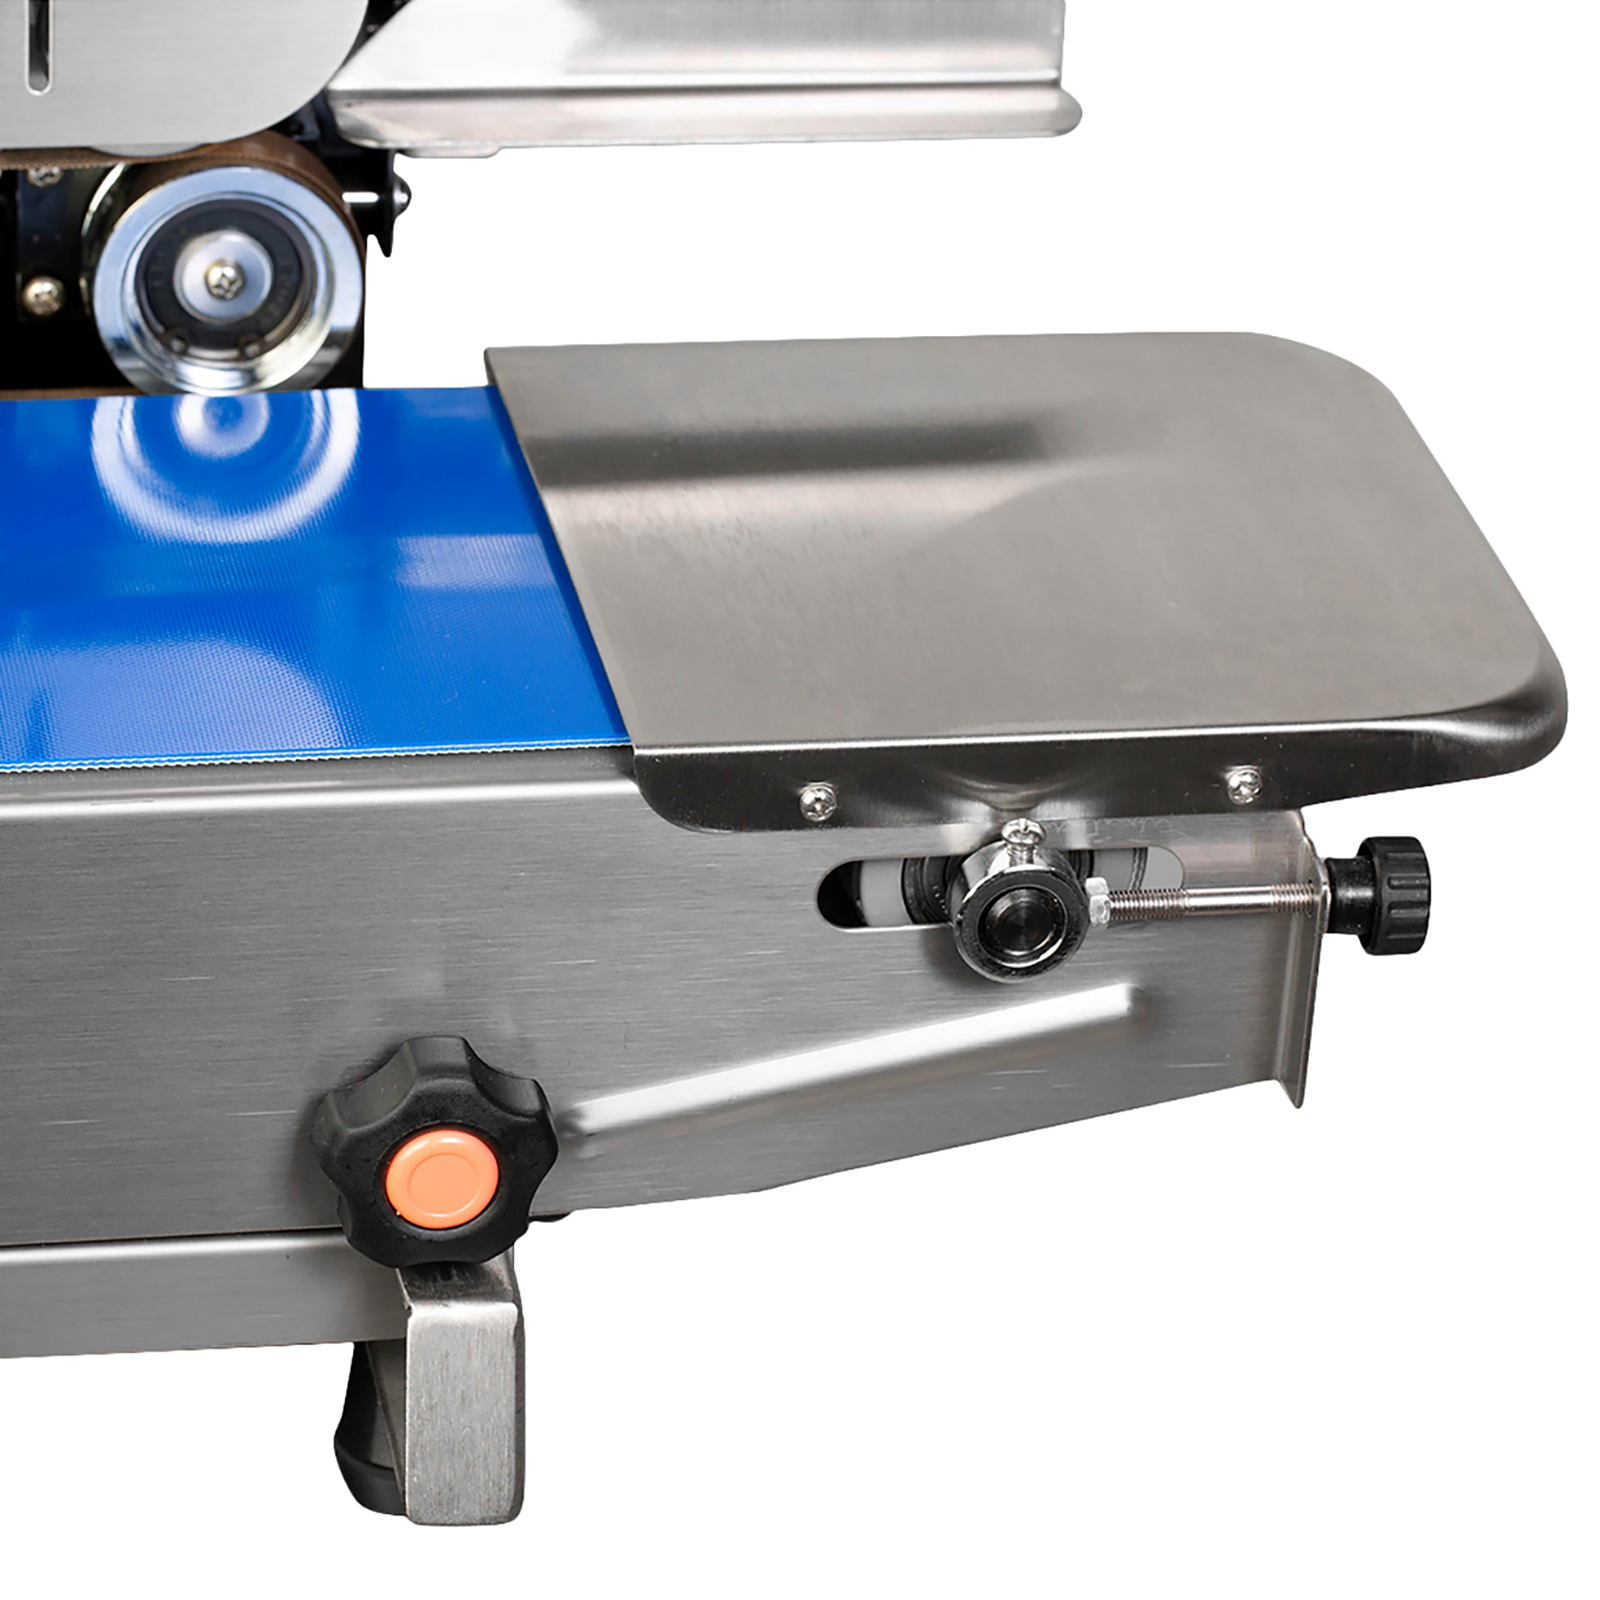 close up of leg and base of a stainless-steel JORESTECH continuous bag sealing machine